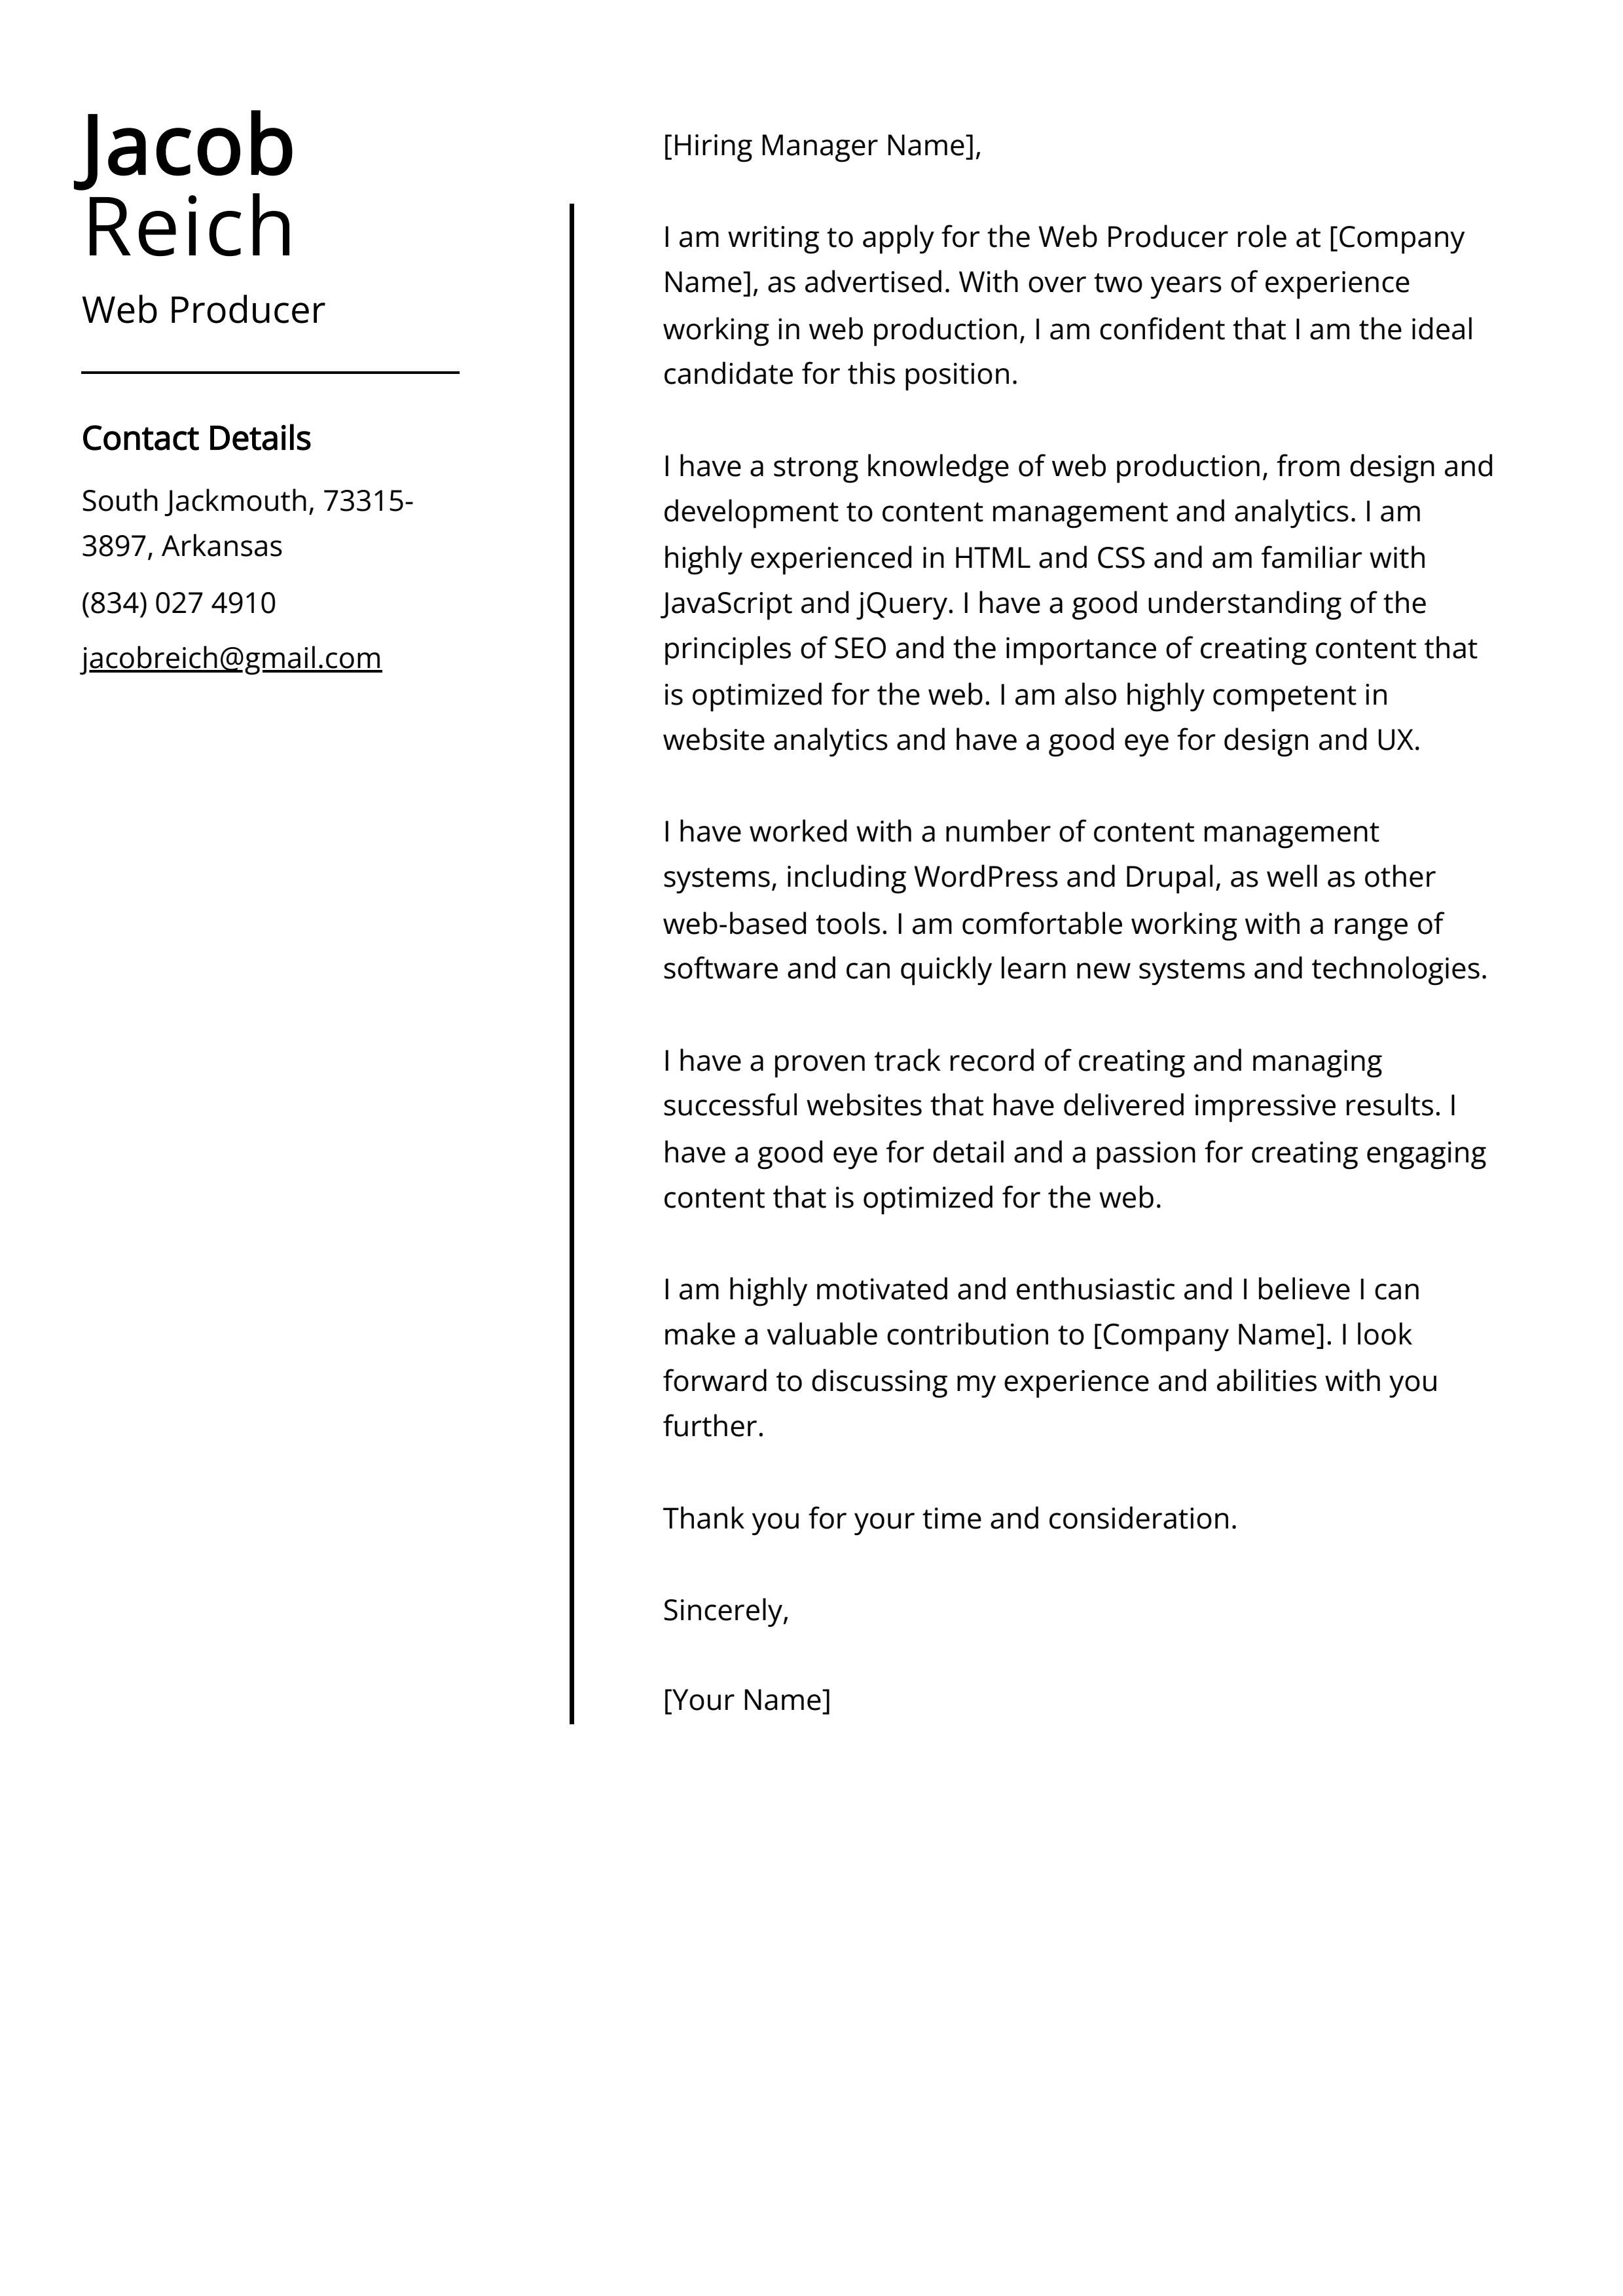 Web Producer Cover Letter Example